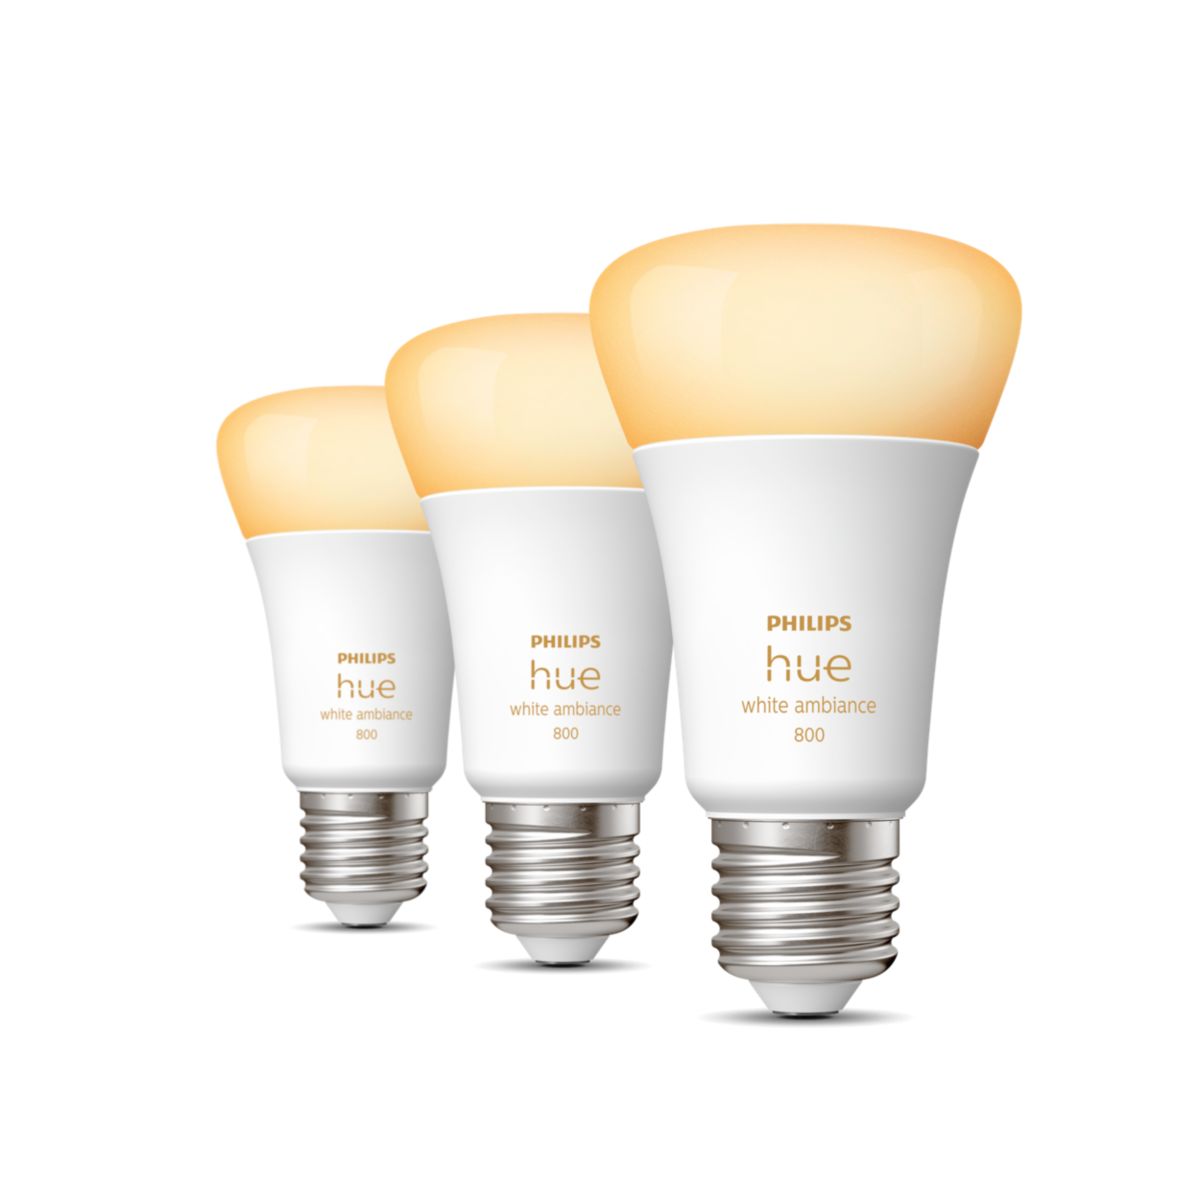 Philips Hue E27 white ambiance 800lm 3-pack